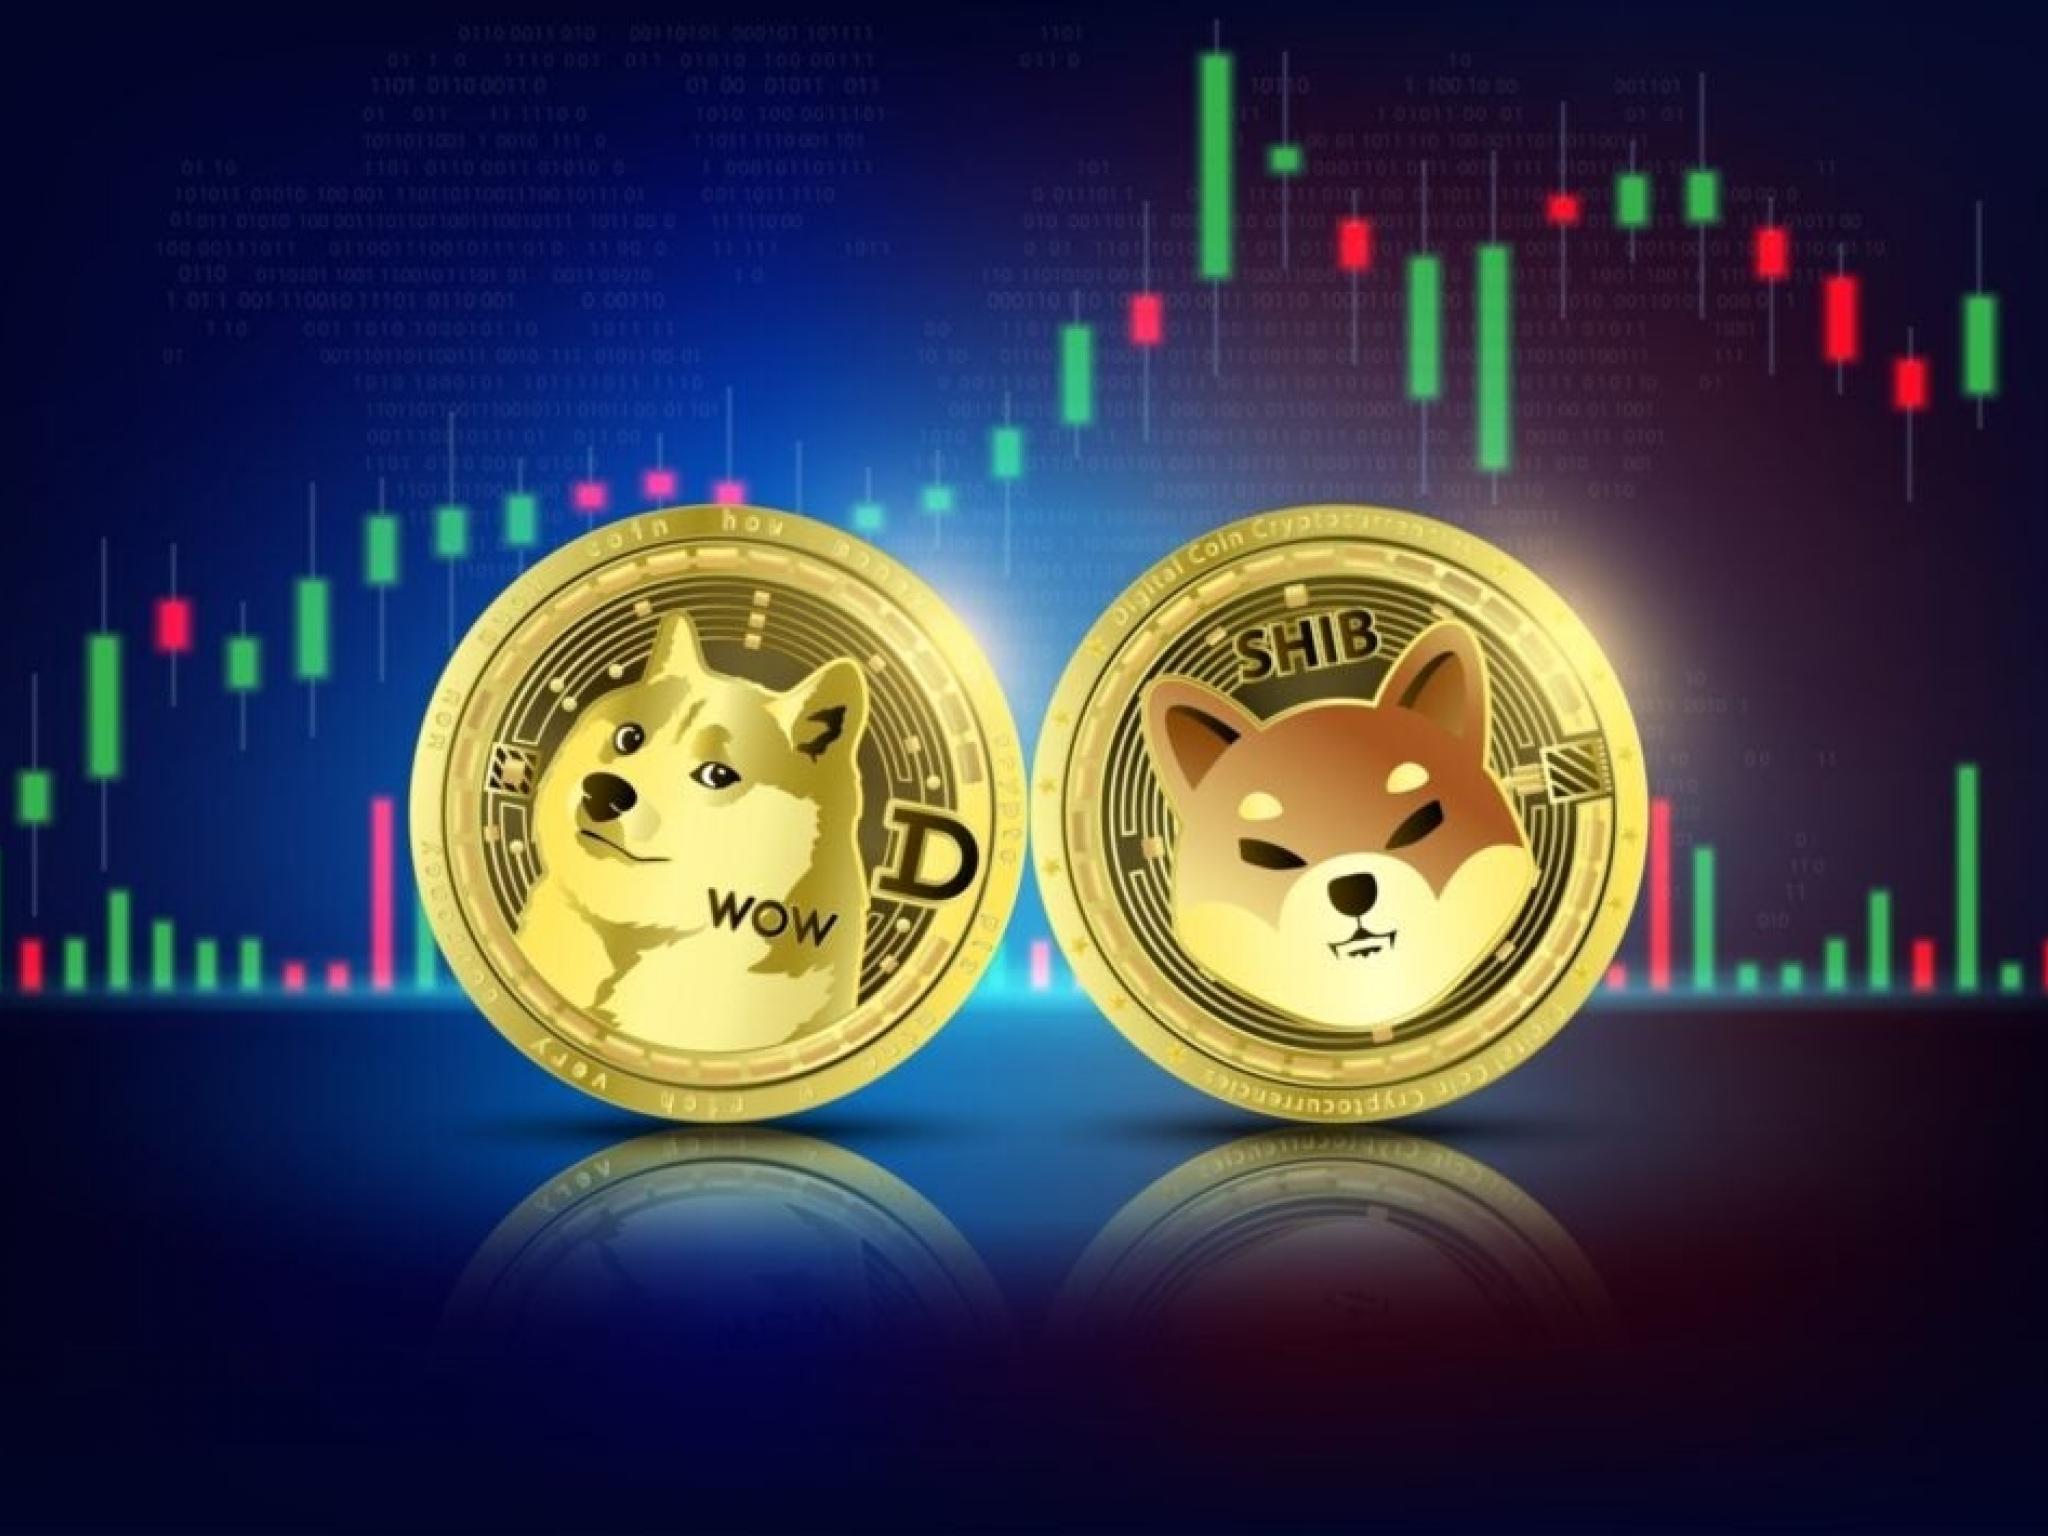  are-dogecoin-and-shiba-inu-due-a-bounce-this-trader-sees-bull-flag-forming-for-one-coin 